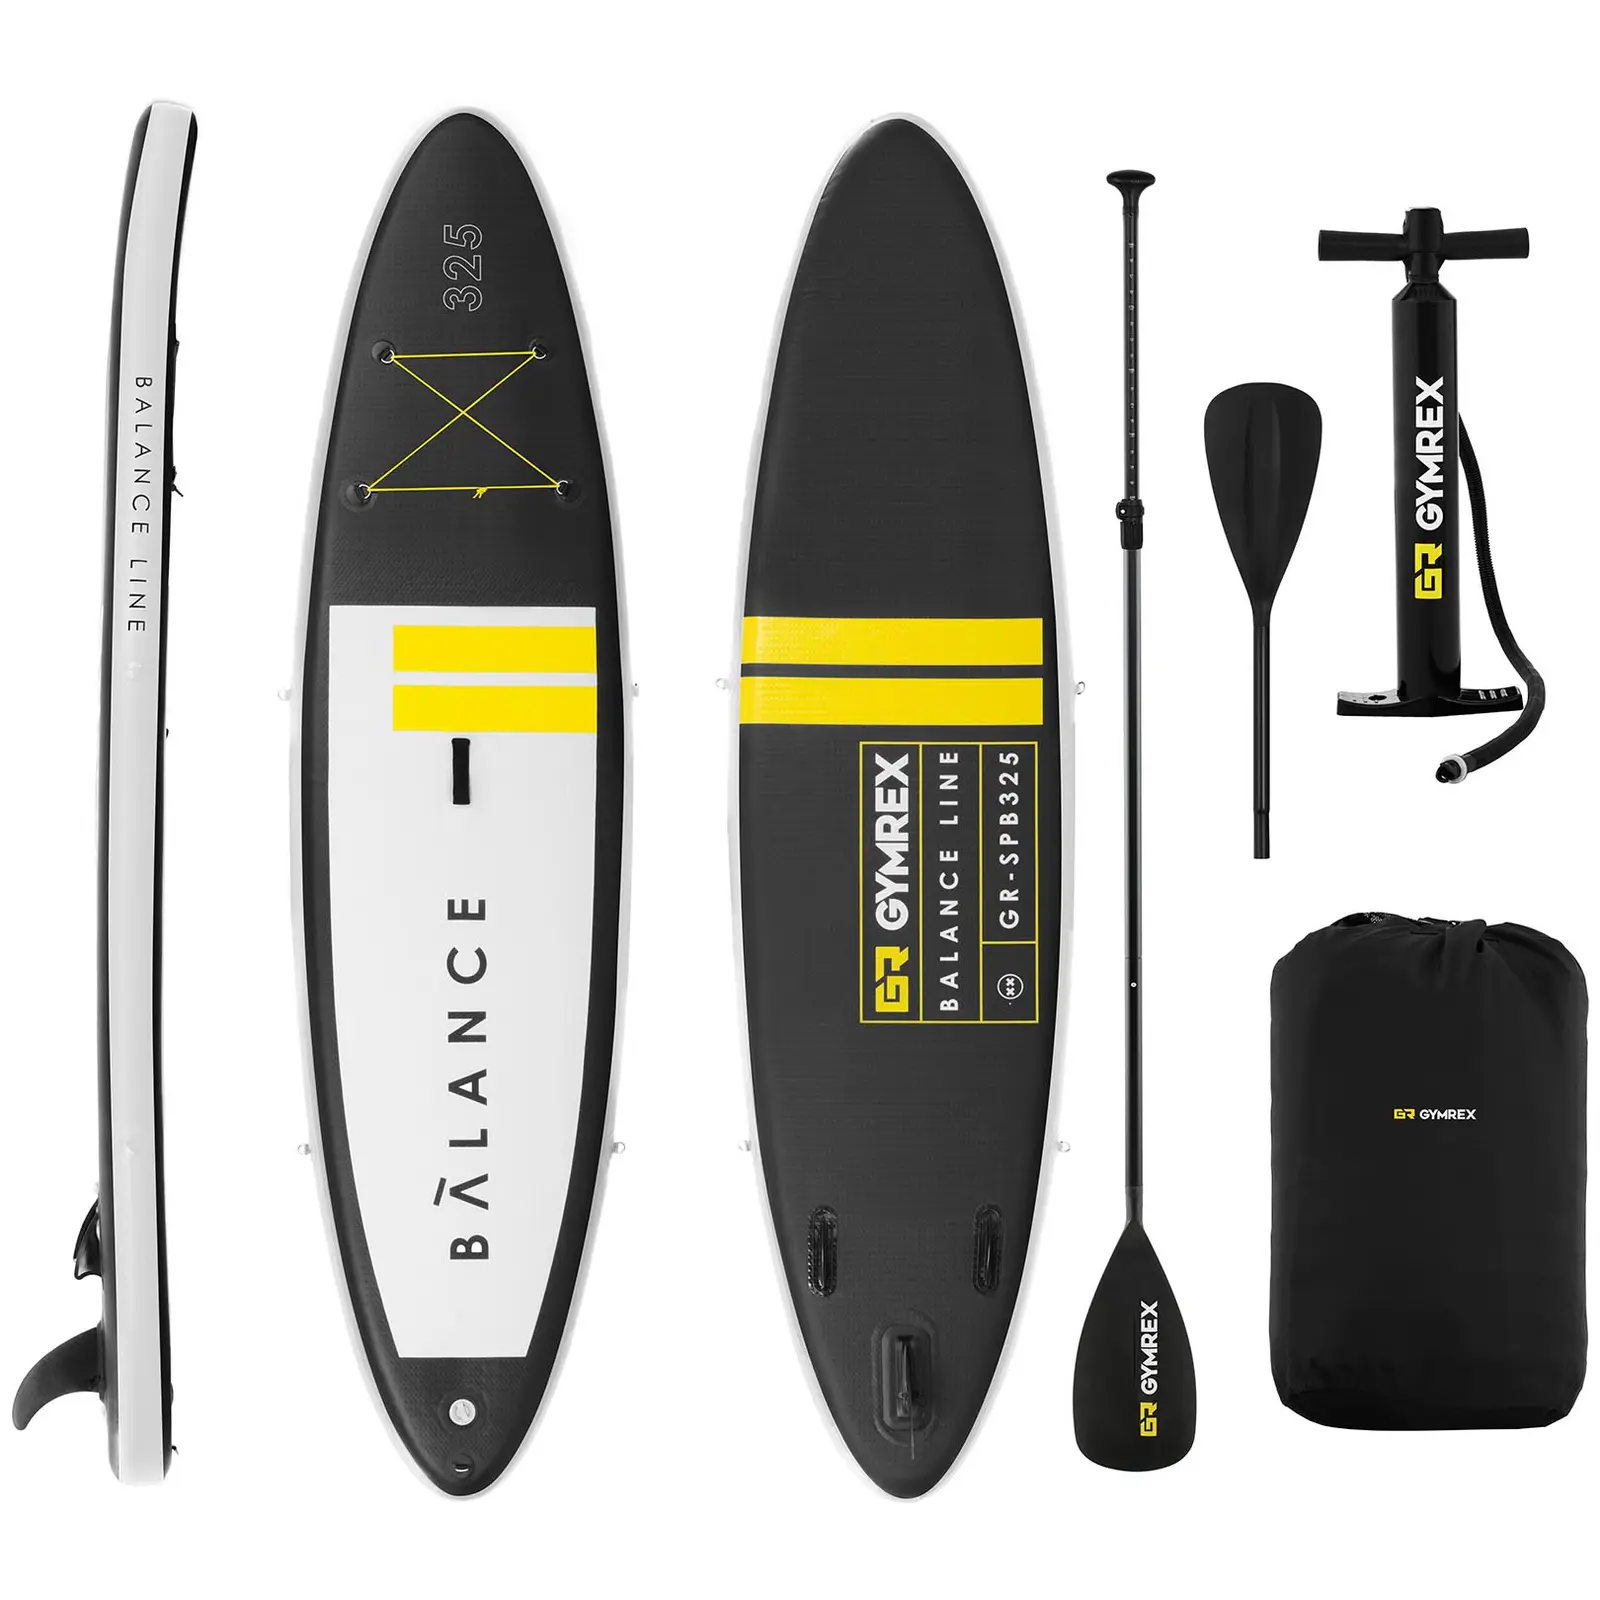 Inflatable SUP Board - 145 kg - black/yellow - set with paddle and accessories